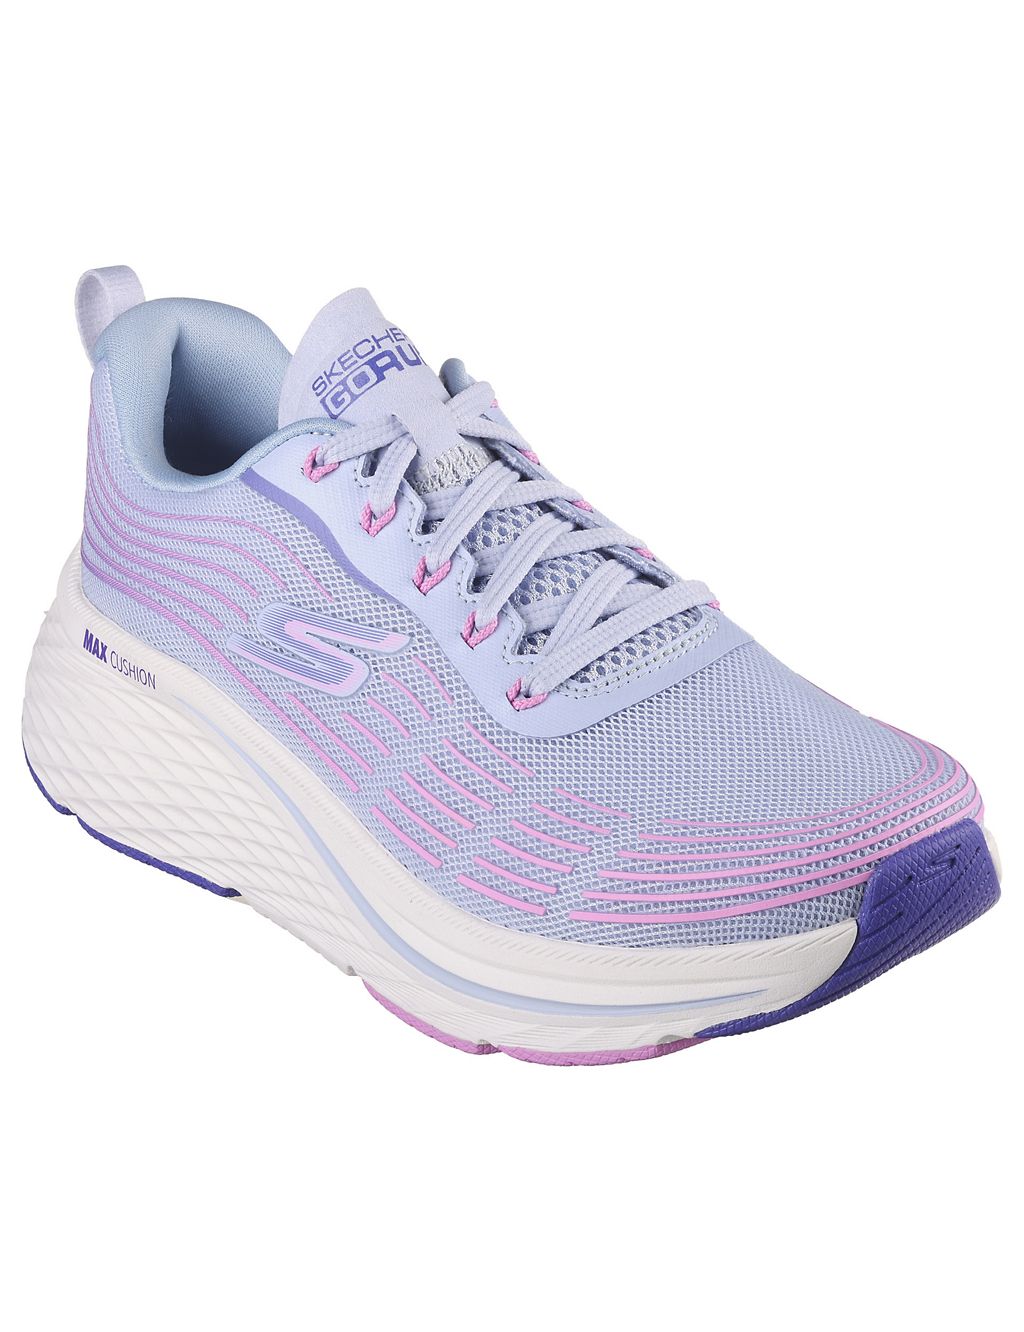 Max Cushioning Elite 2.0 Lace Up Trainers 1 of 5